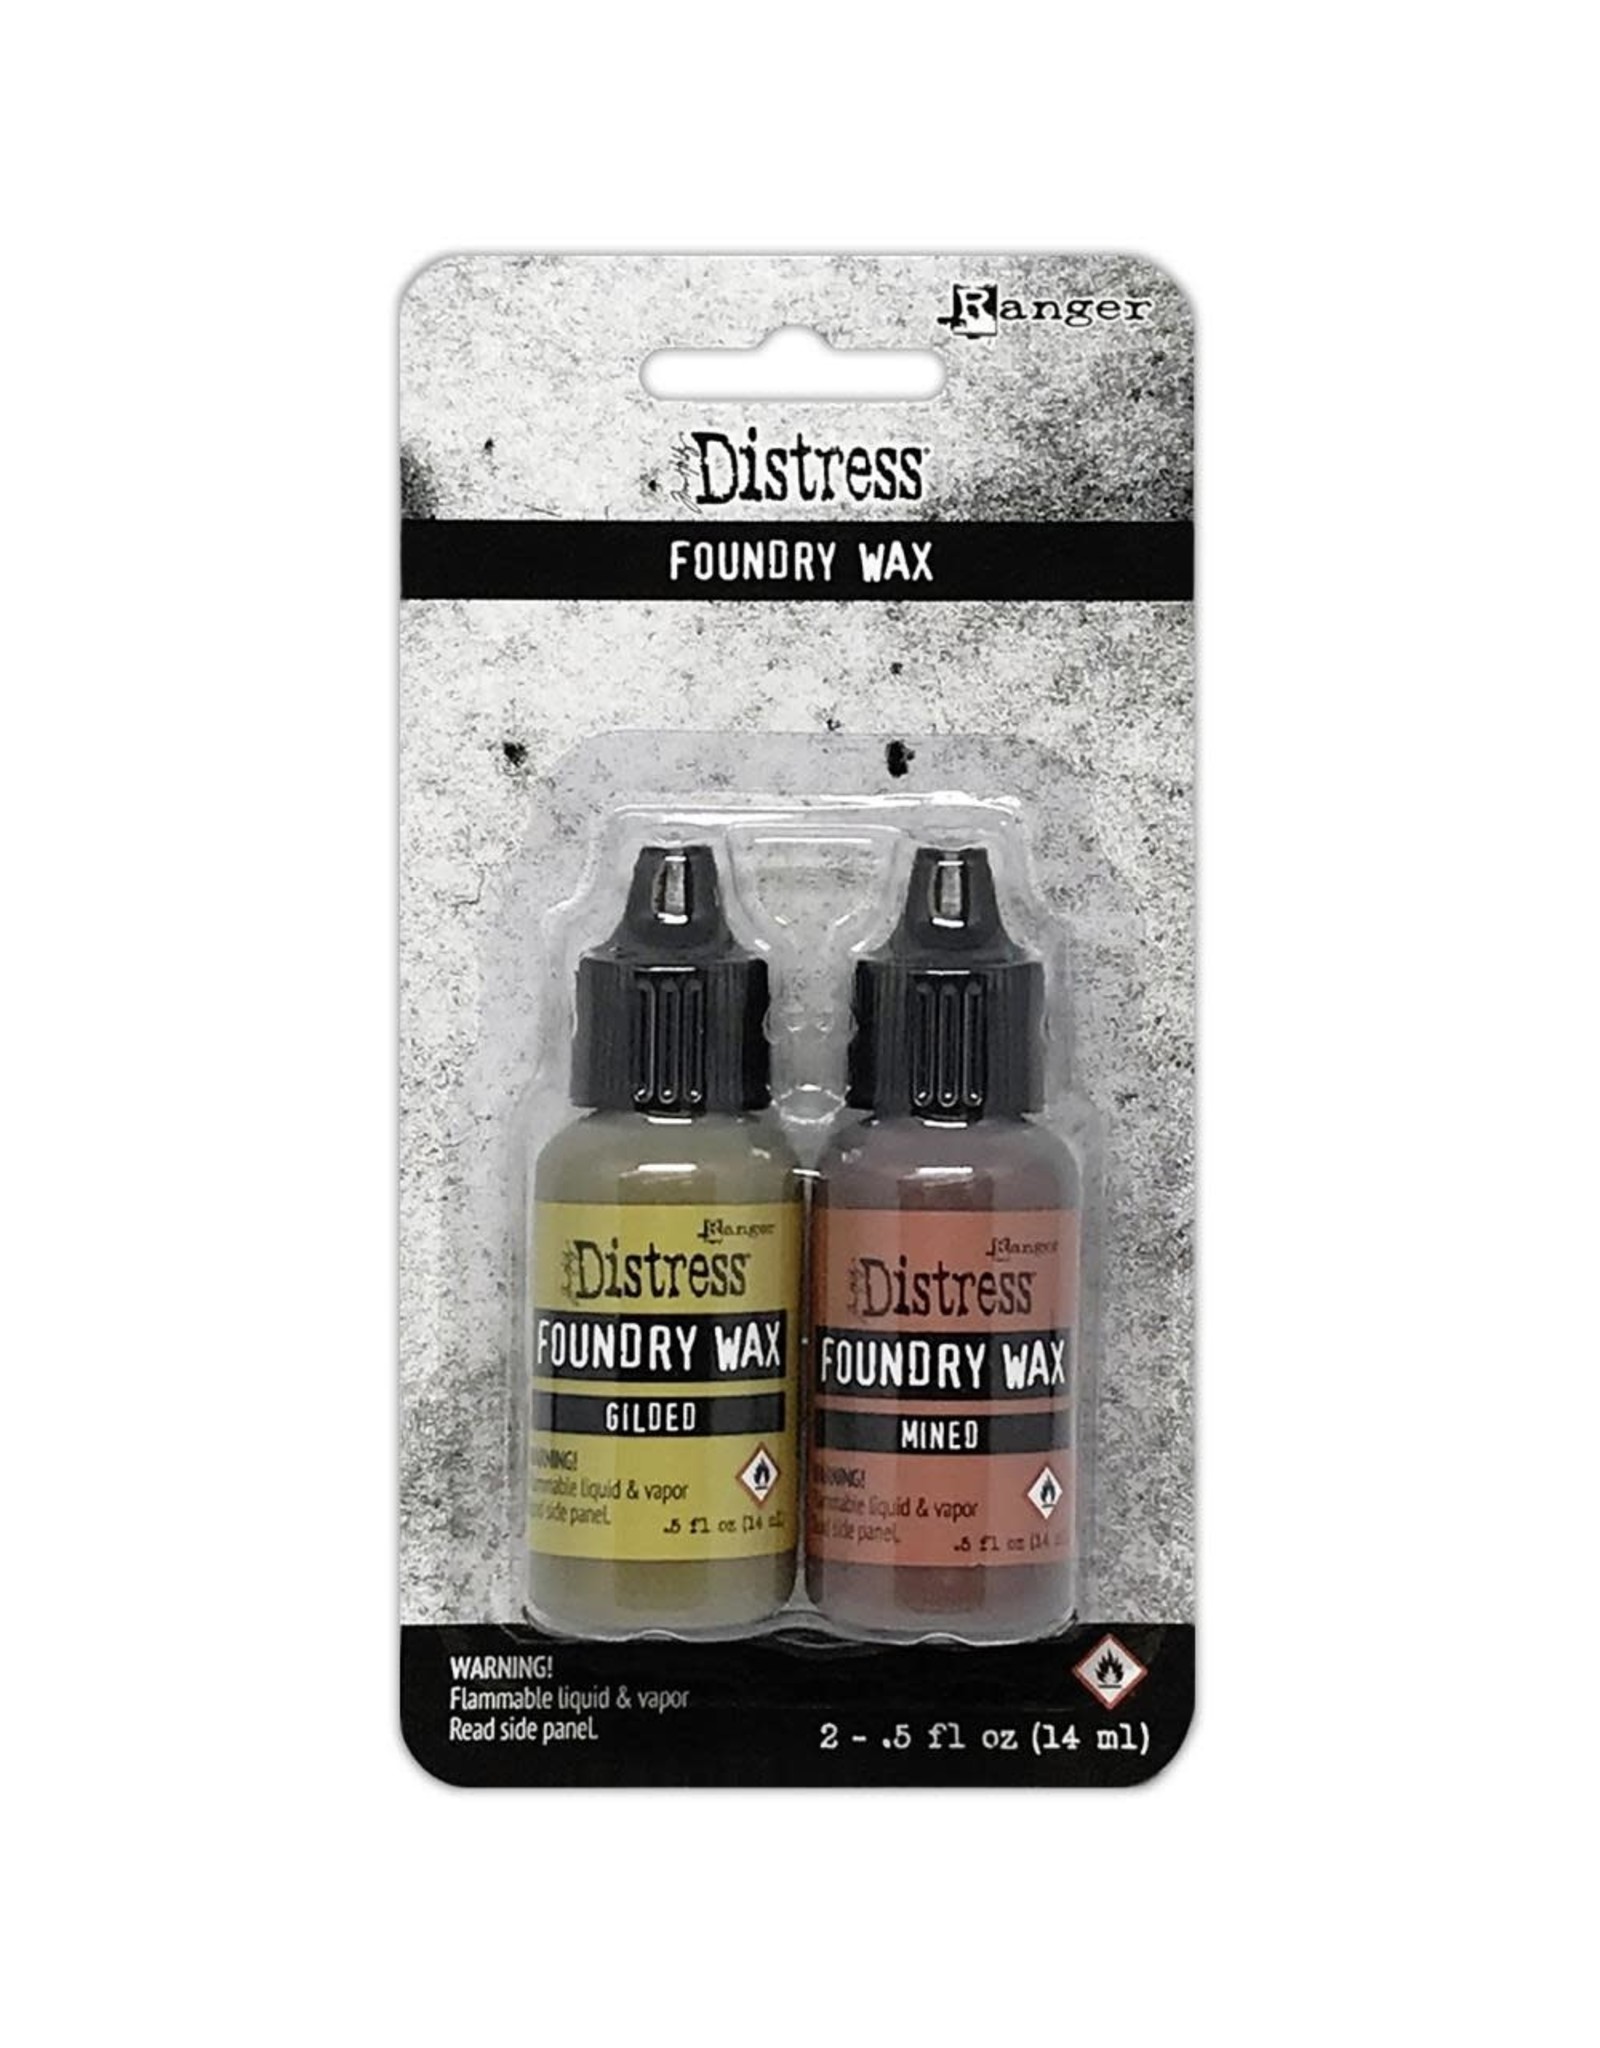 Tim Holtz - Ranger Foundry Wax Gilded and Mined